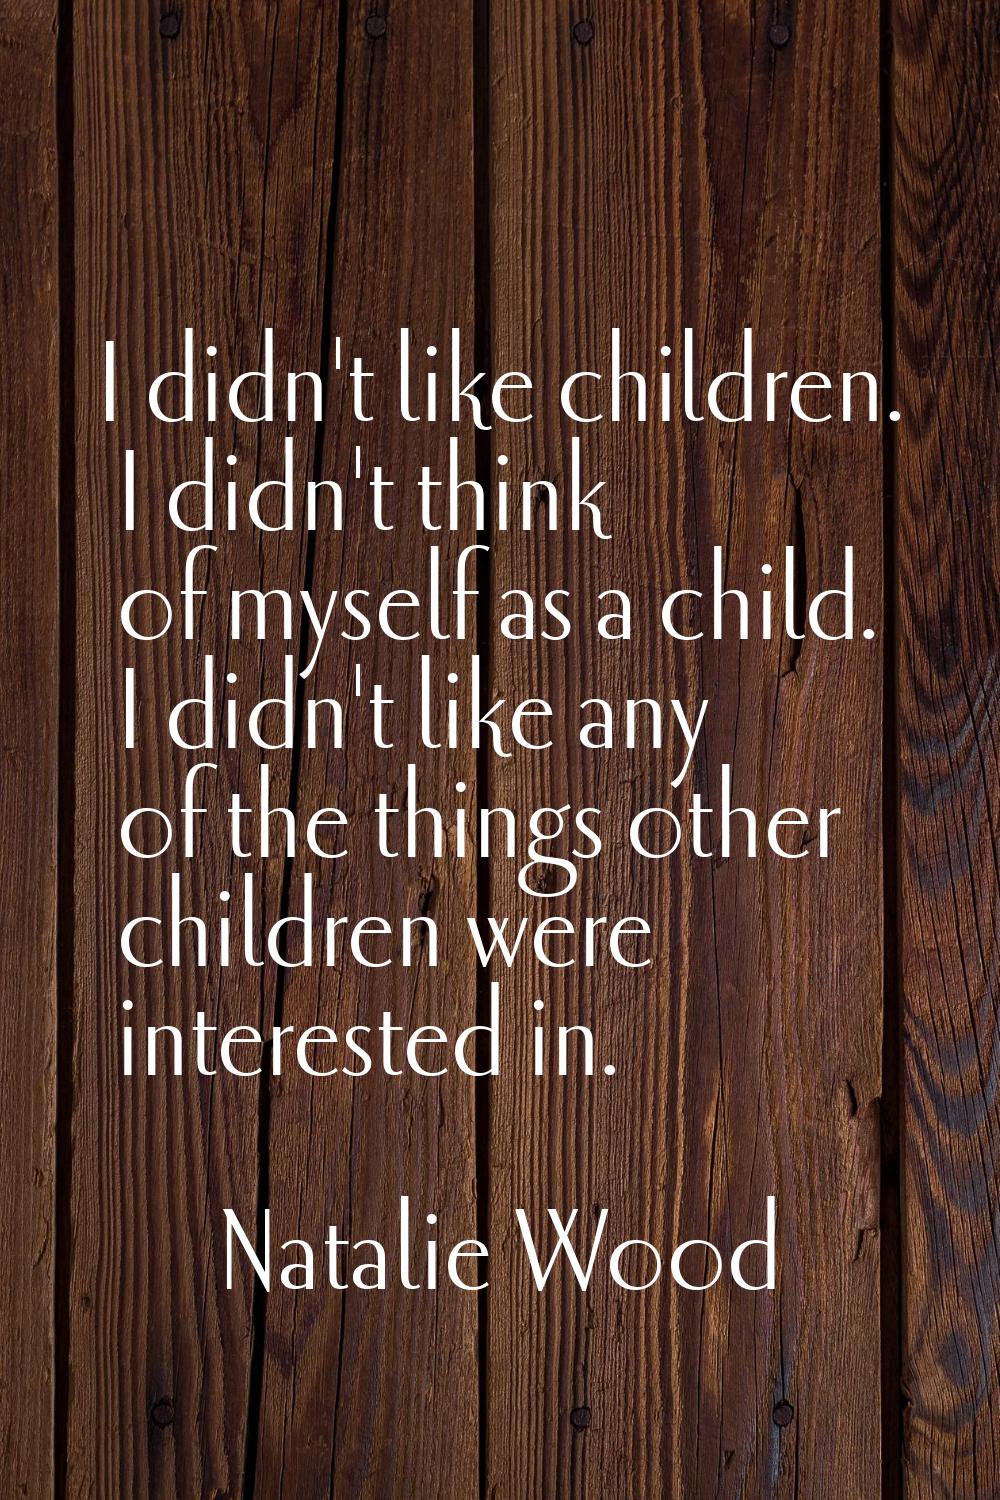 I didn't like children. I didn't think of myself as a child. I didn't like any of the things other 